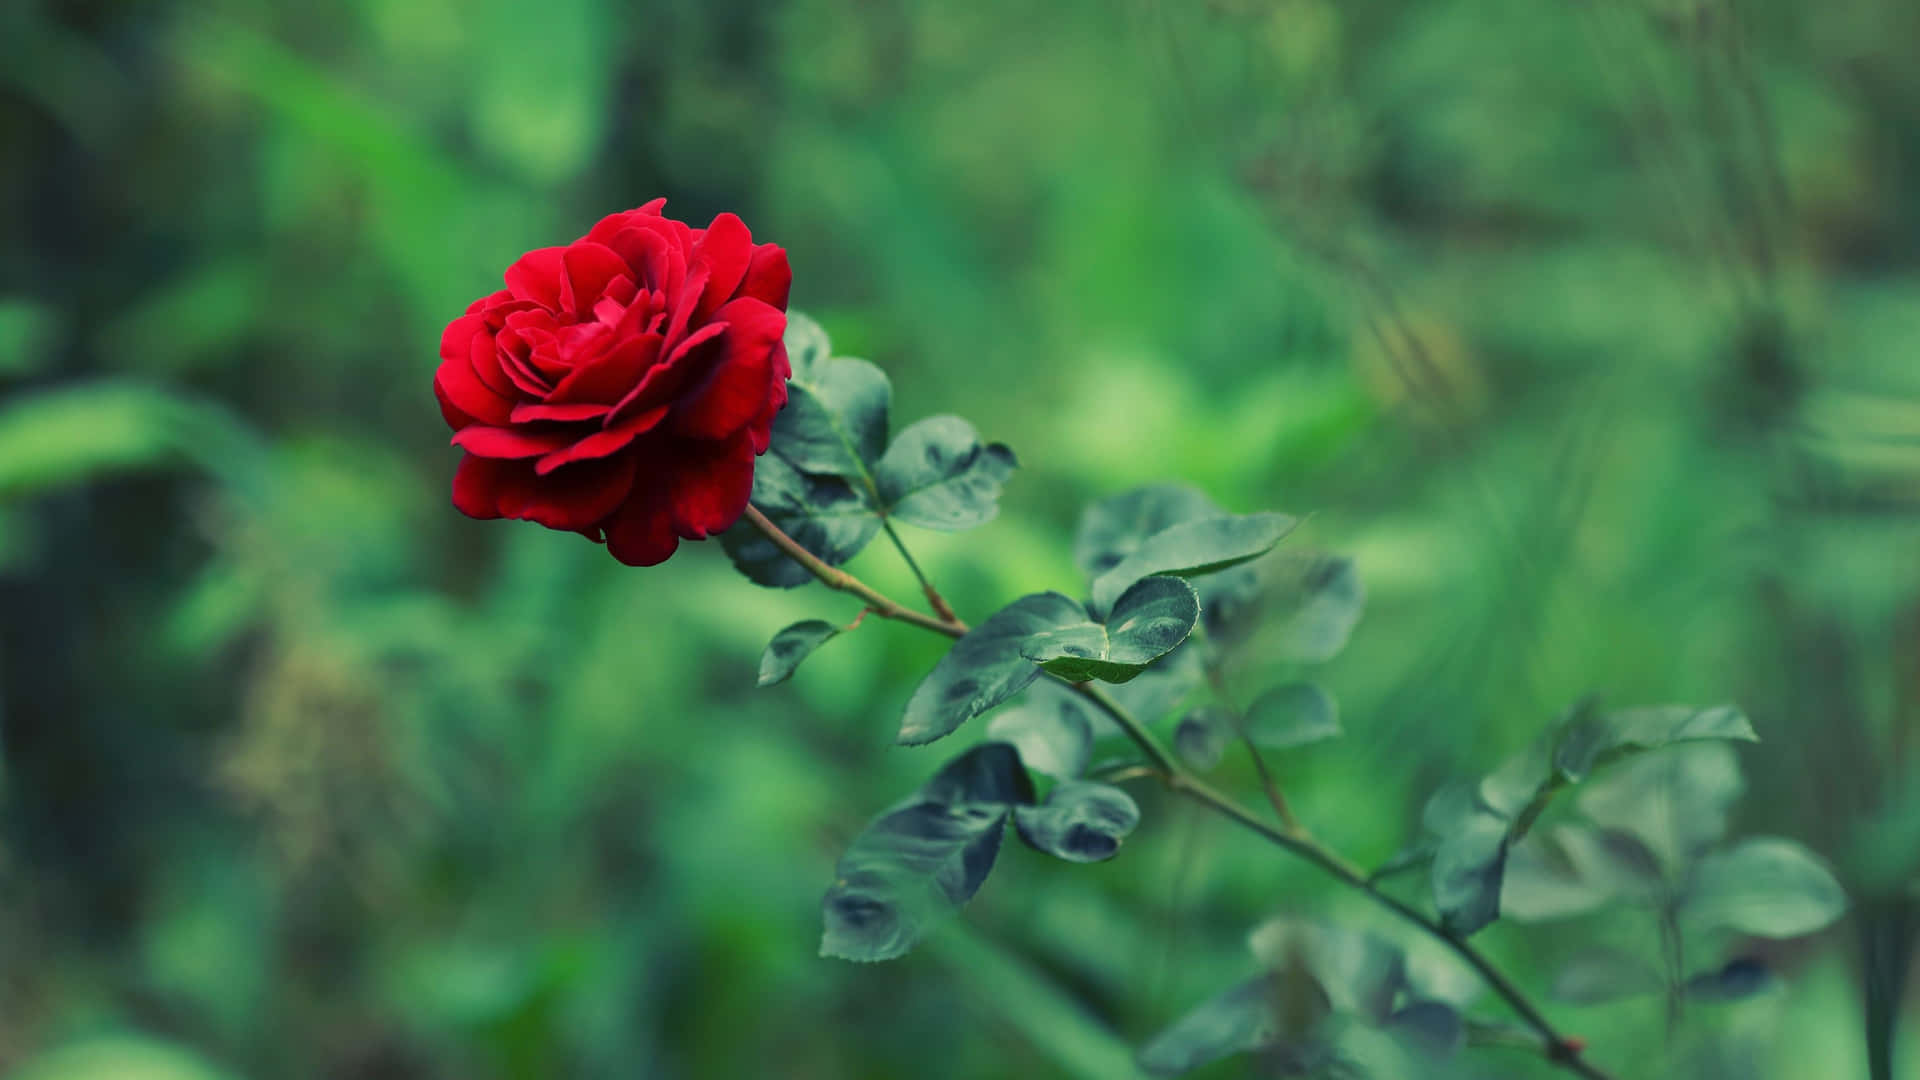 Feel the beauty of nature with this magnificent Cool Rose! Wallpaper